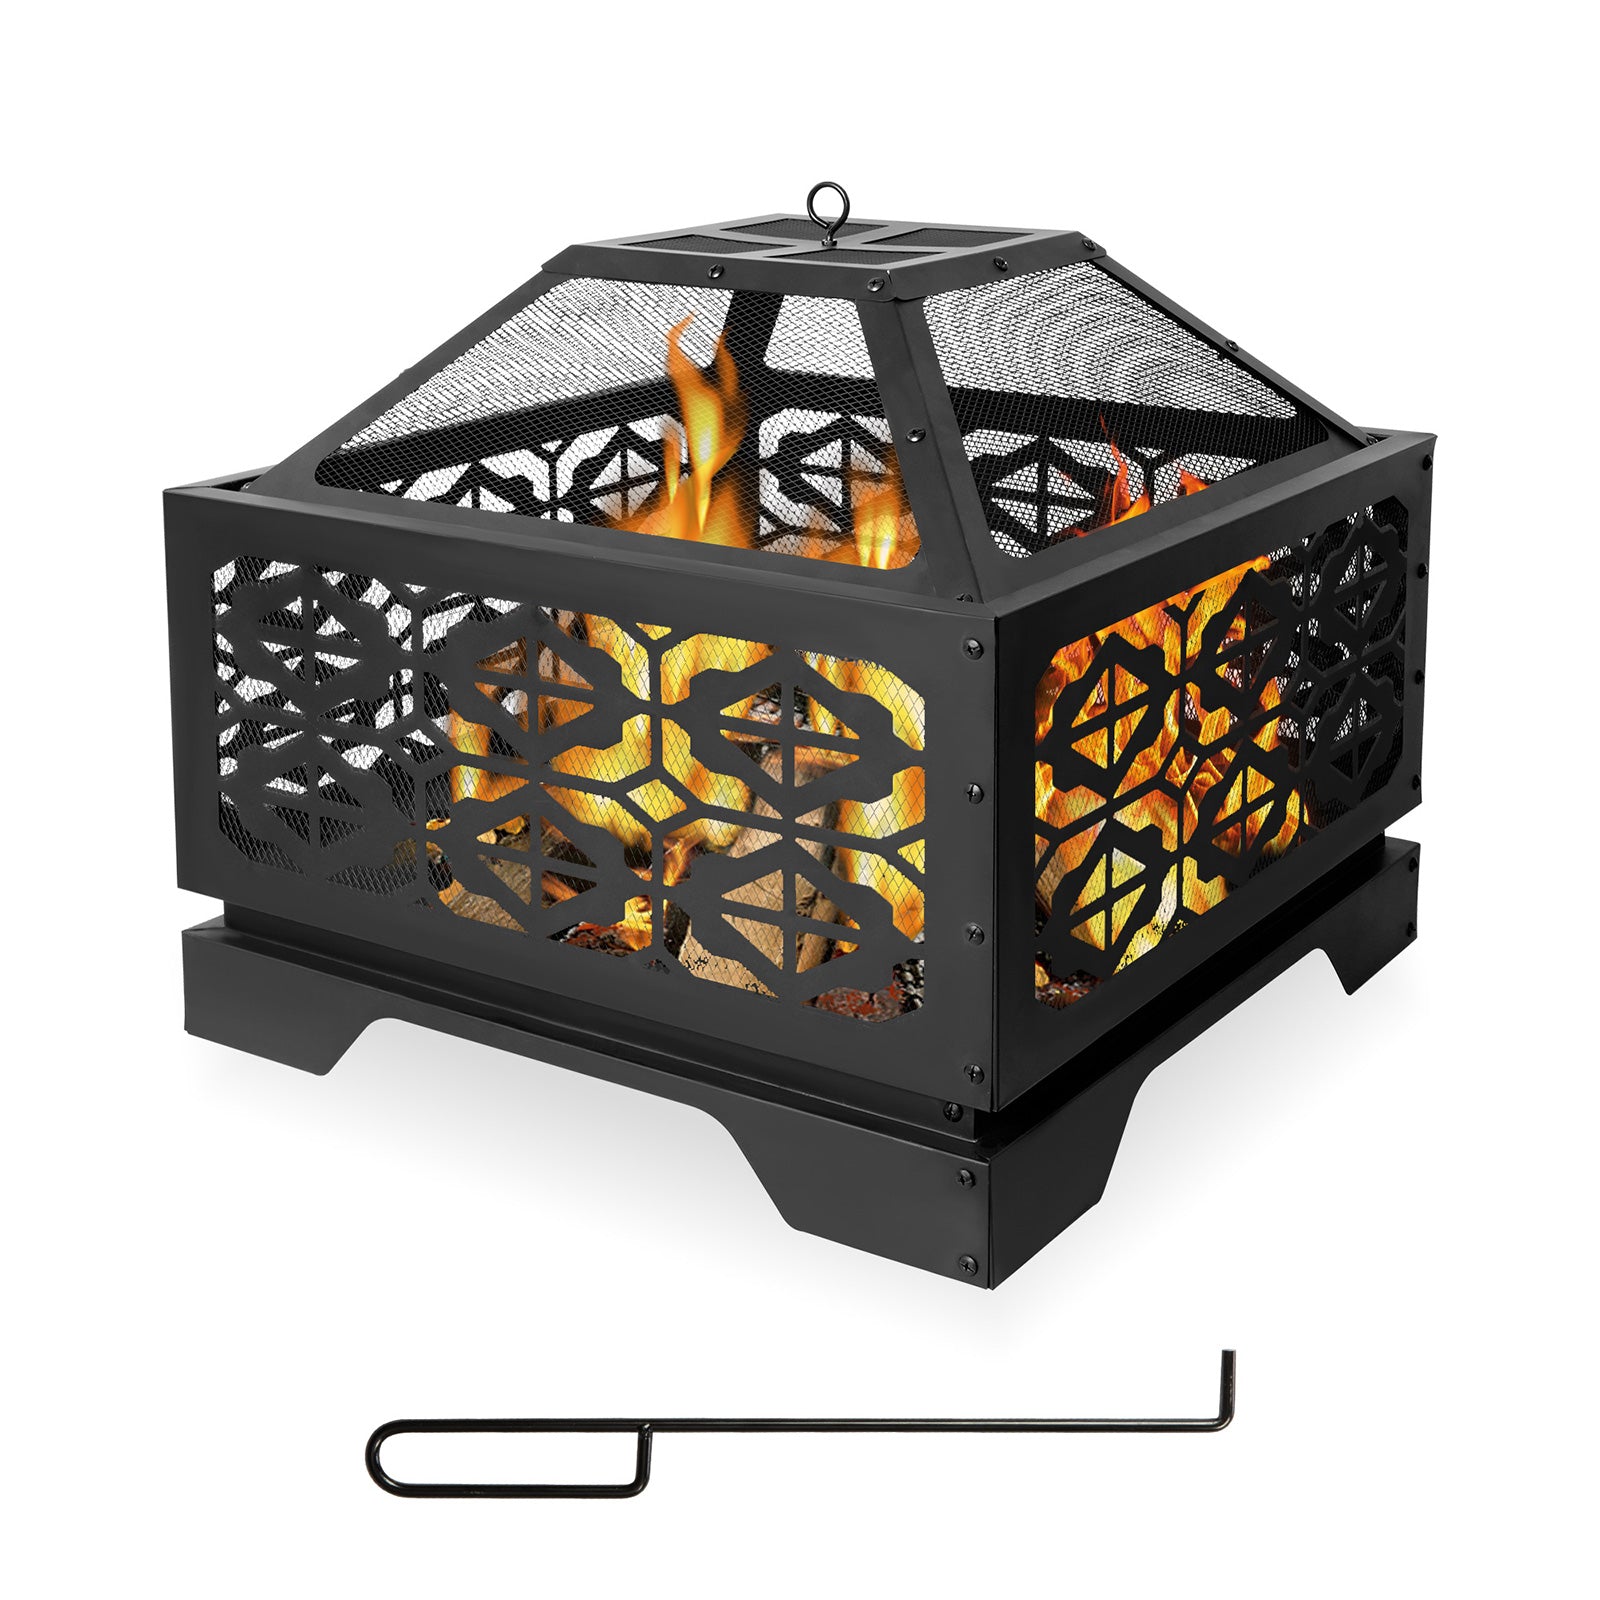 26" Square Outdoor Wood Burning Fire Pit with Steel BBQ Grill, Spark Screen and Poker